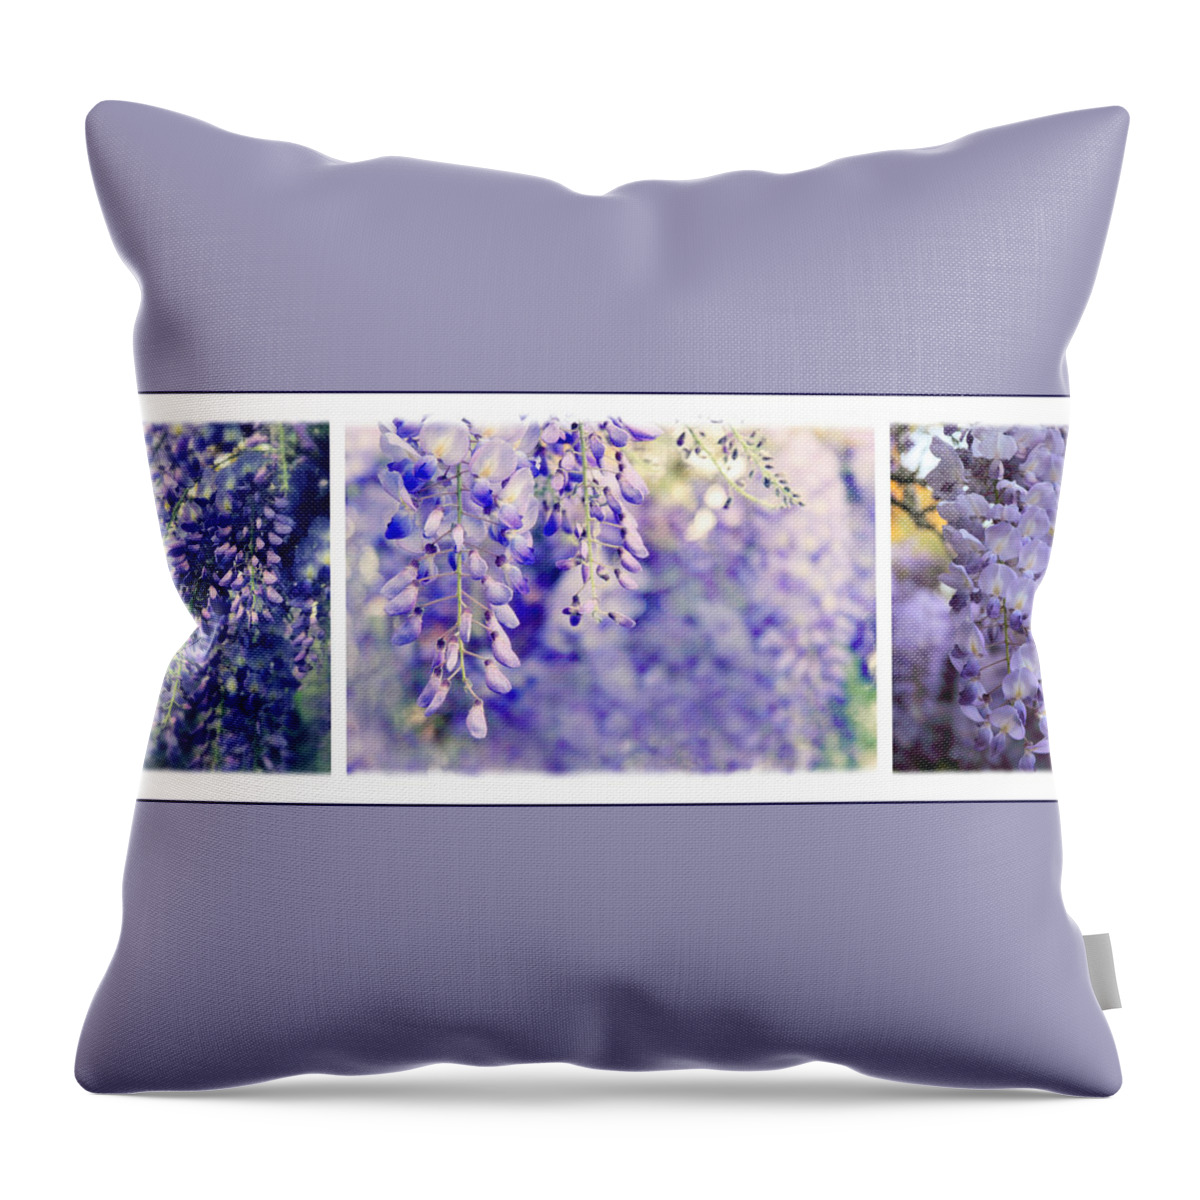 Collage Throw Pillow featuring the photograph Wisteria Triptych by Jessica Jenney